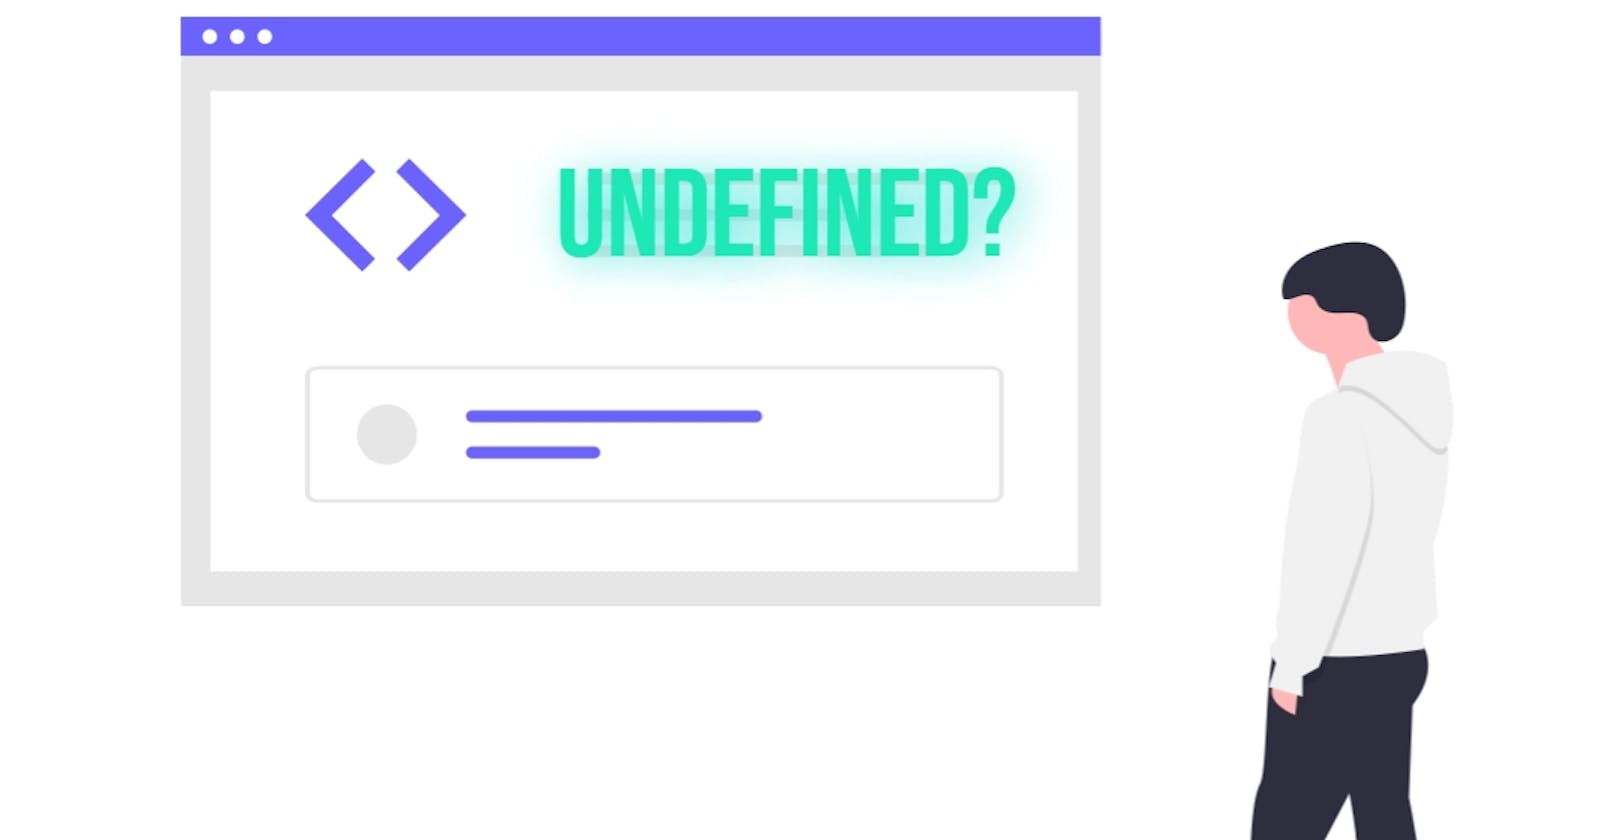 >Undefined